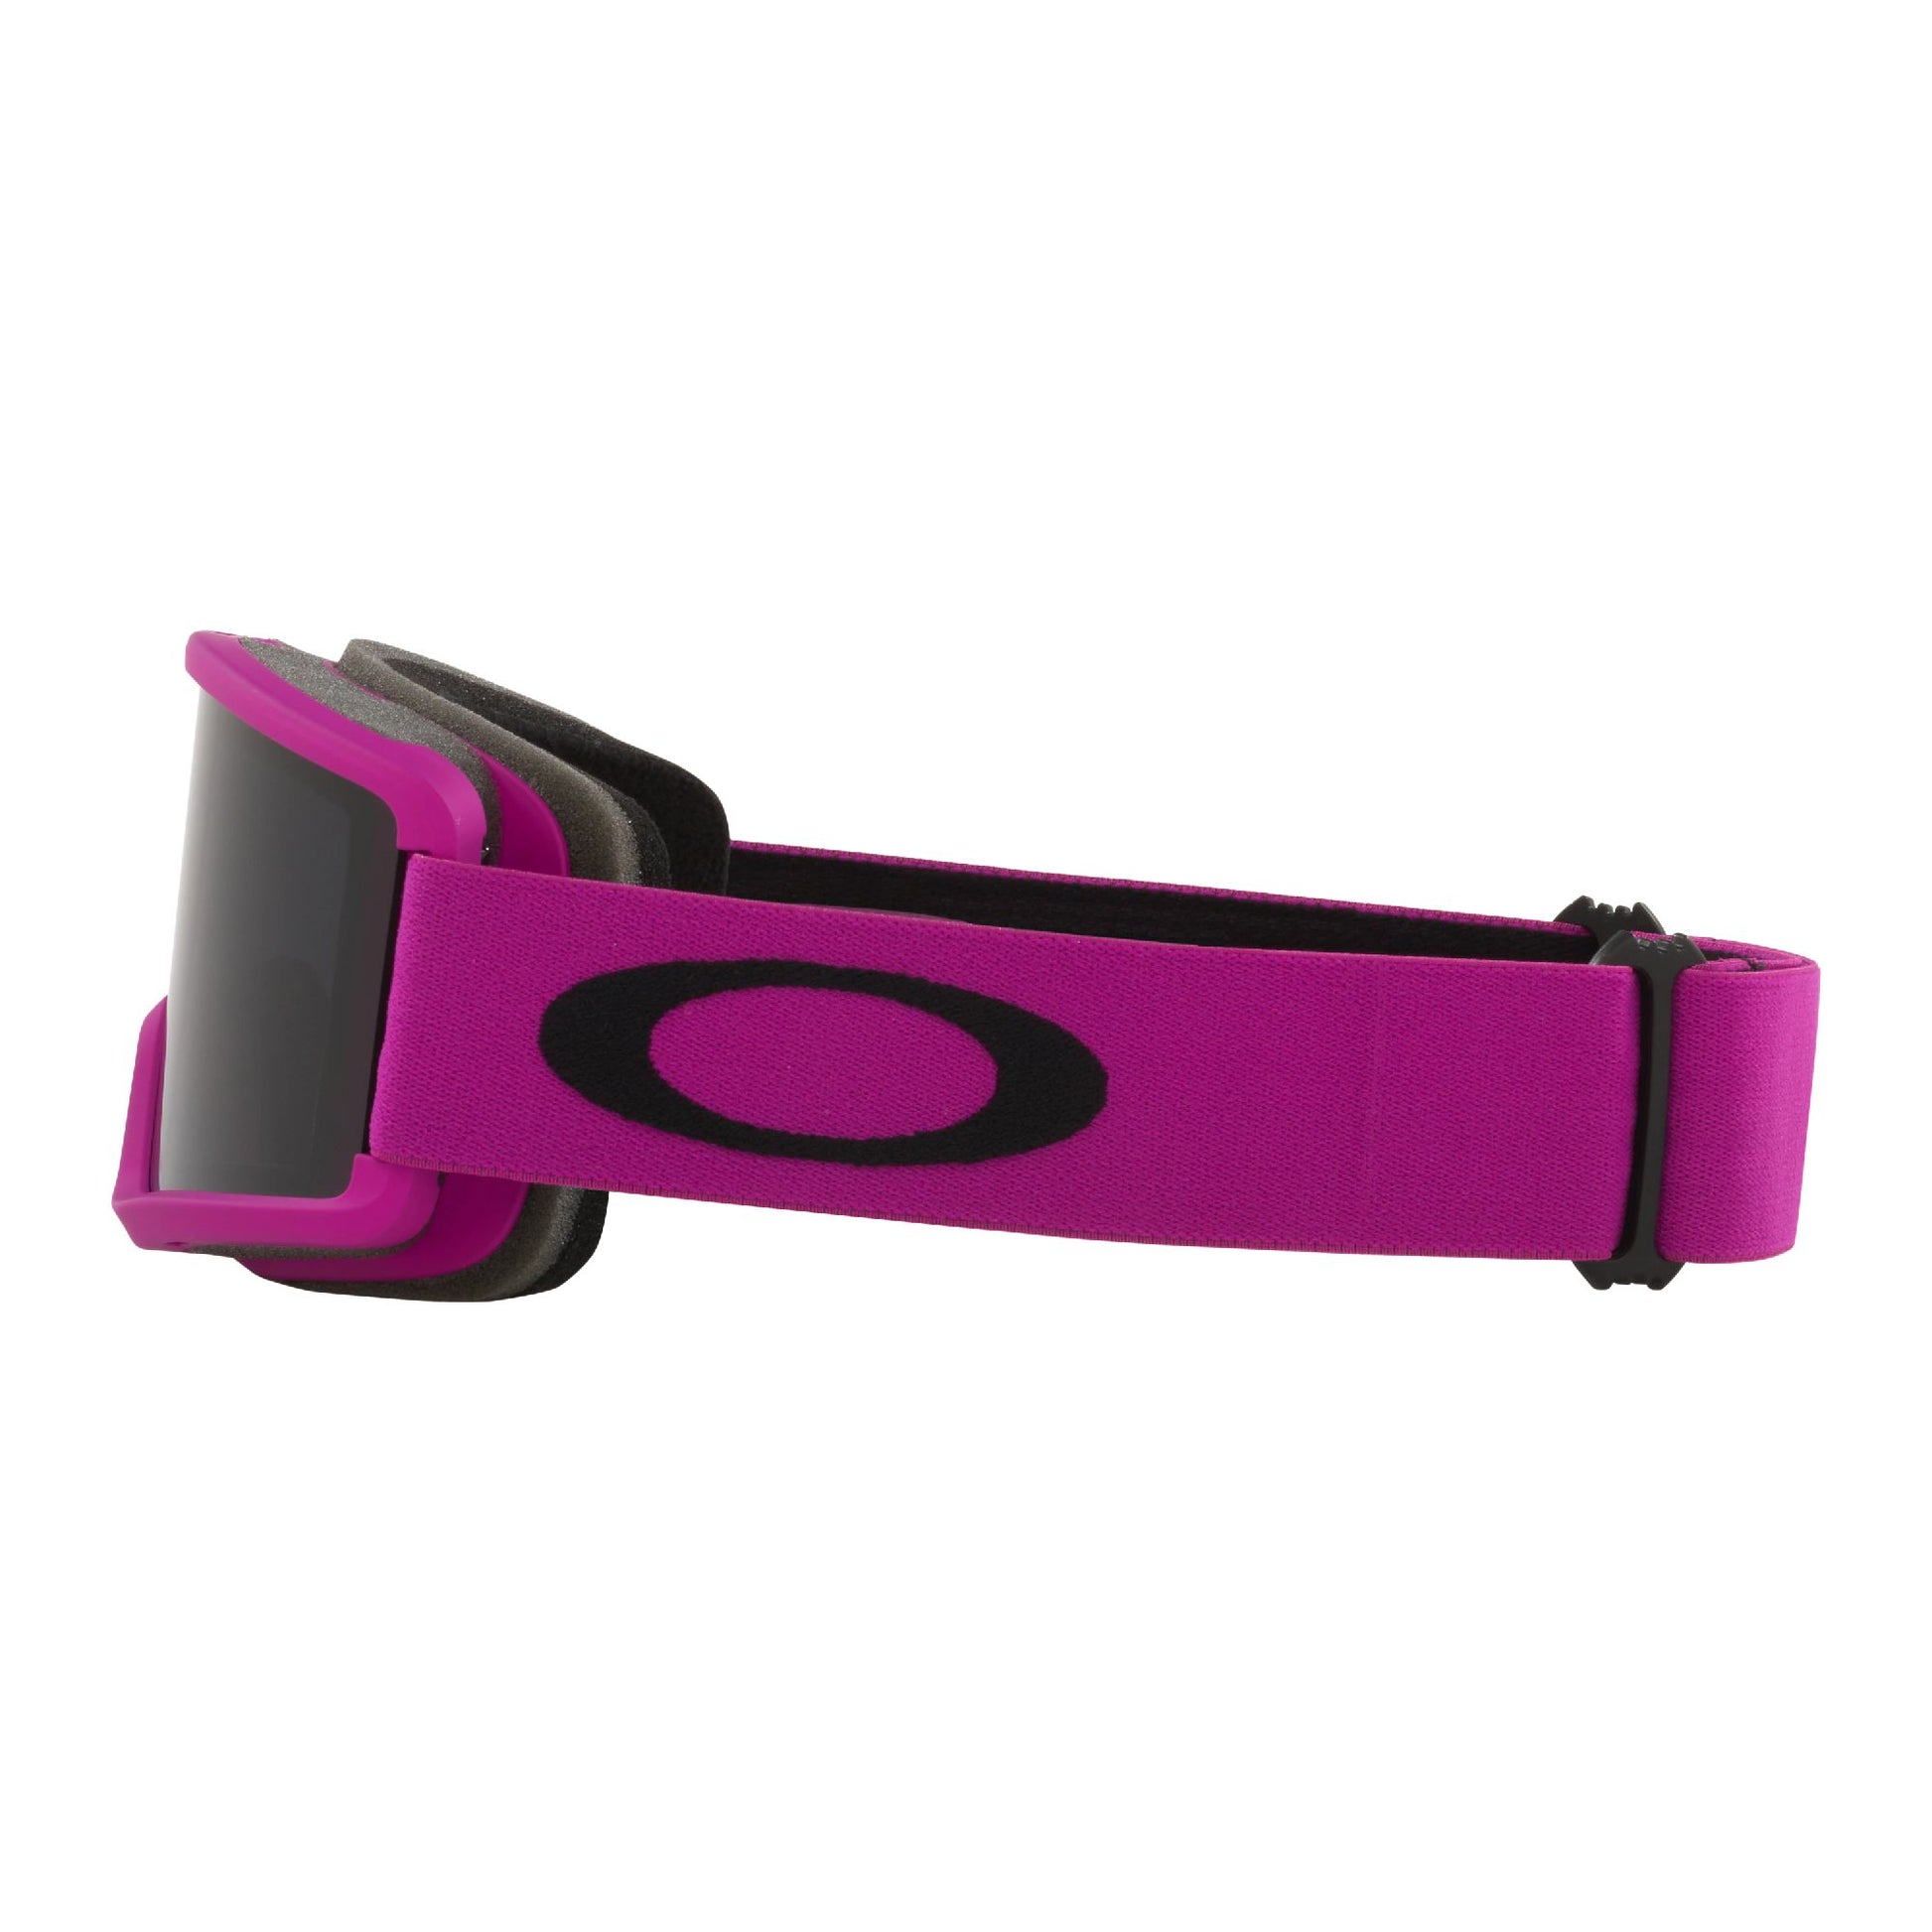 Oakley Youth Target Line S Snow Goggles Ultra Purple Dark Grey Snow Goggles